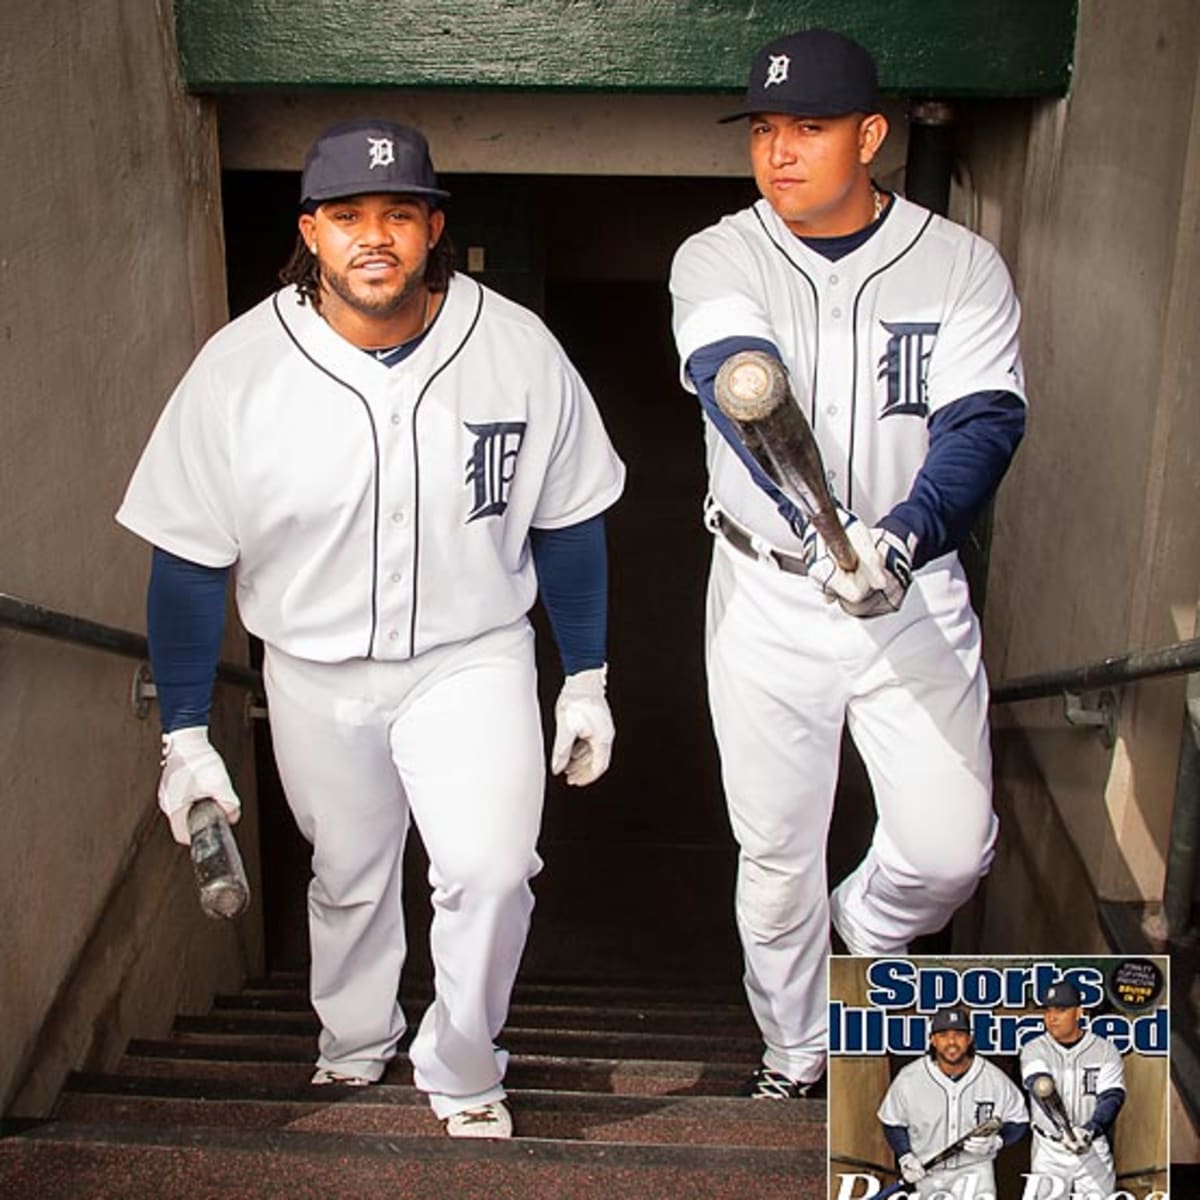 The Cabrera, Fielder SI cover shoot - Sports Illustrated